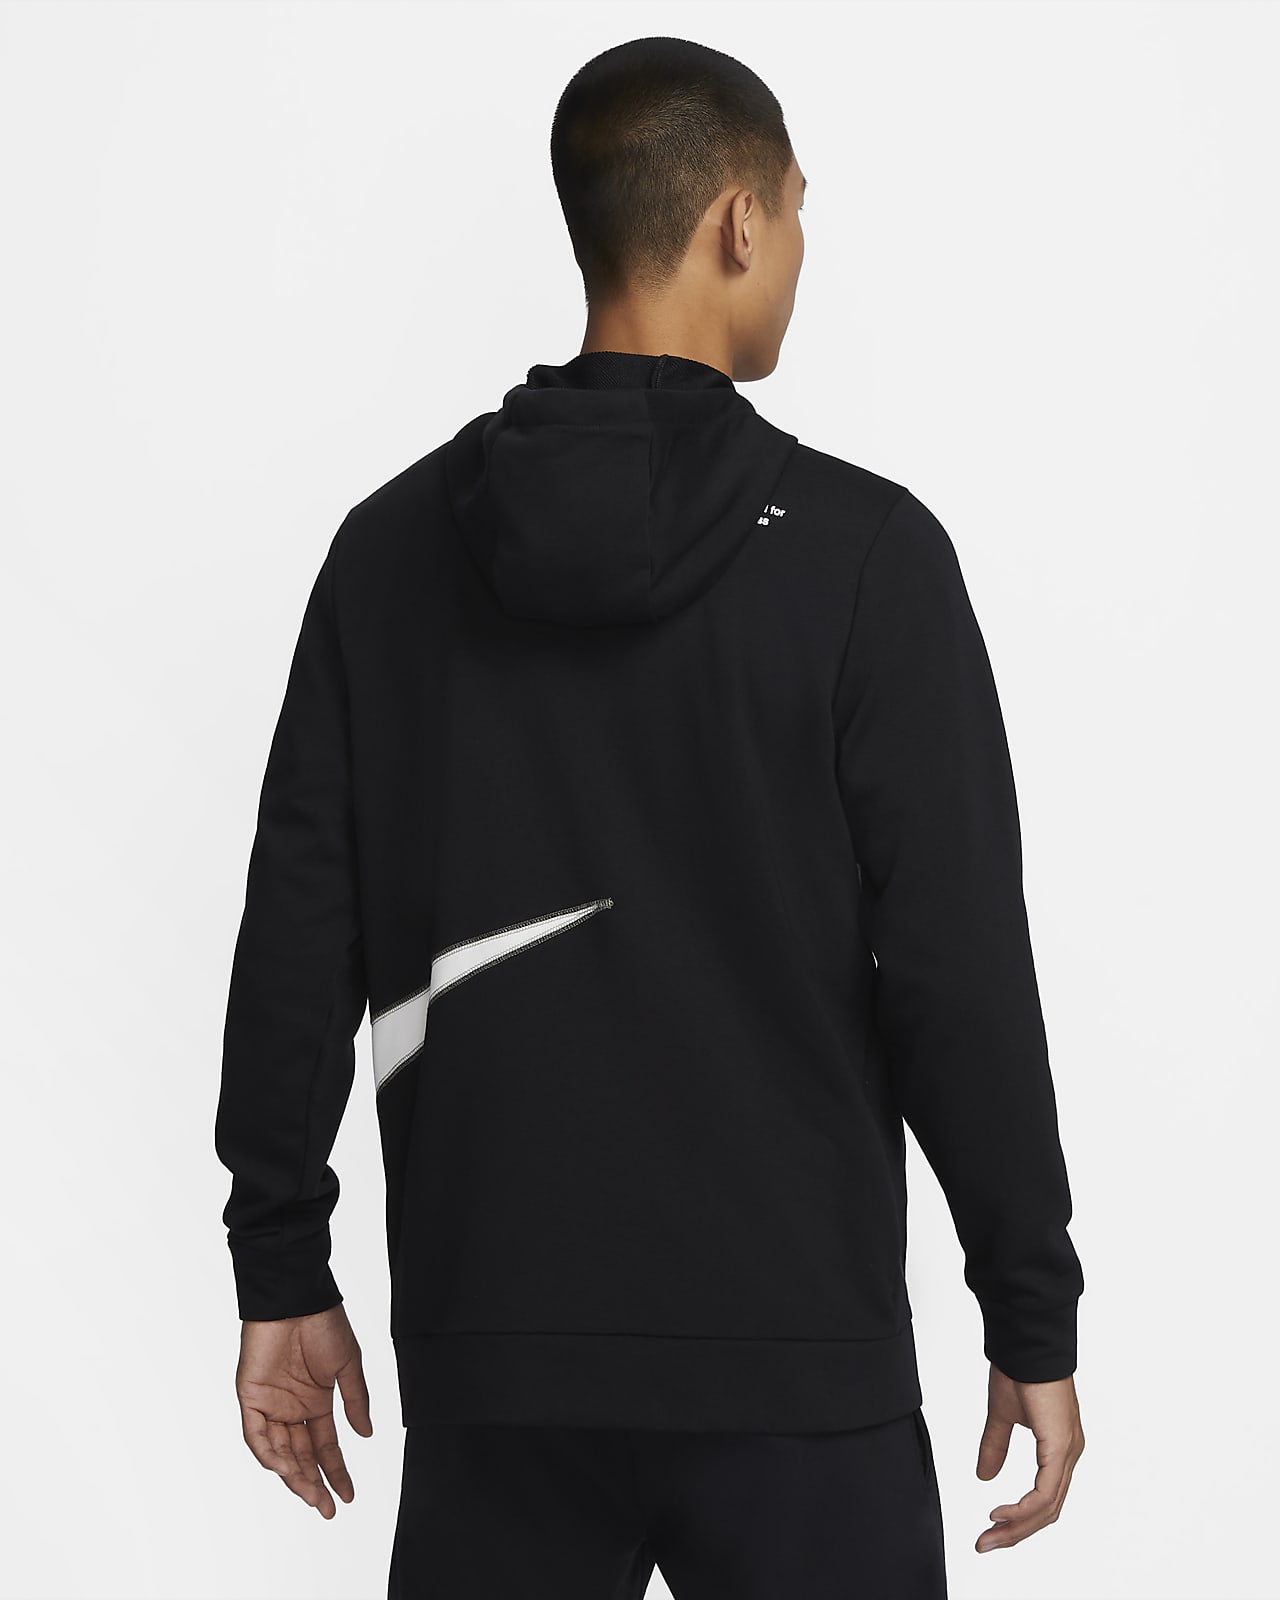 https://static.nike.com/a/images/t_PDP_1280_v1/f_auto,q_auto:eco/f5d21e08-24ec-480b-b692-e76b95b66e20/dri-fit-fleece-fitness-hoodie-3TDLfT.png